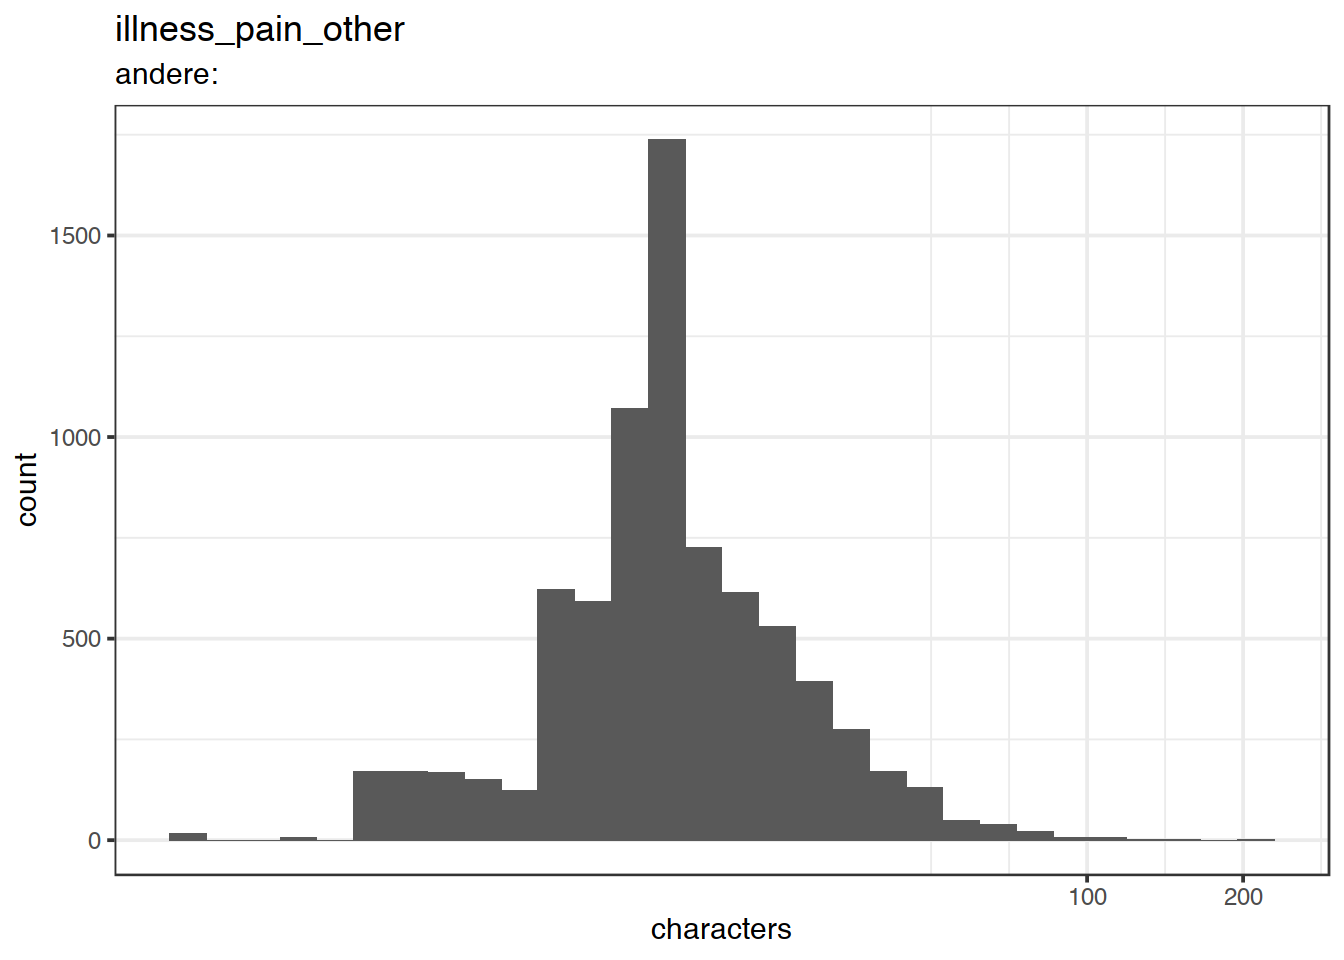 Distribution of values for illness_pain_other